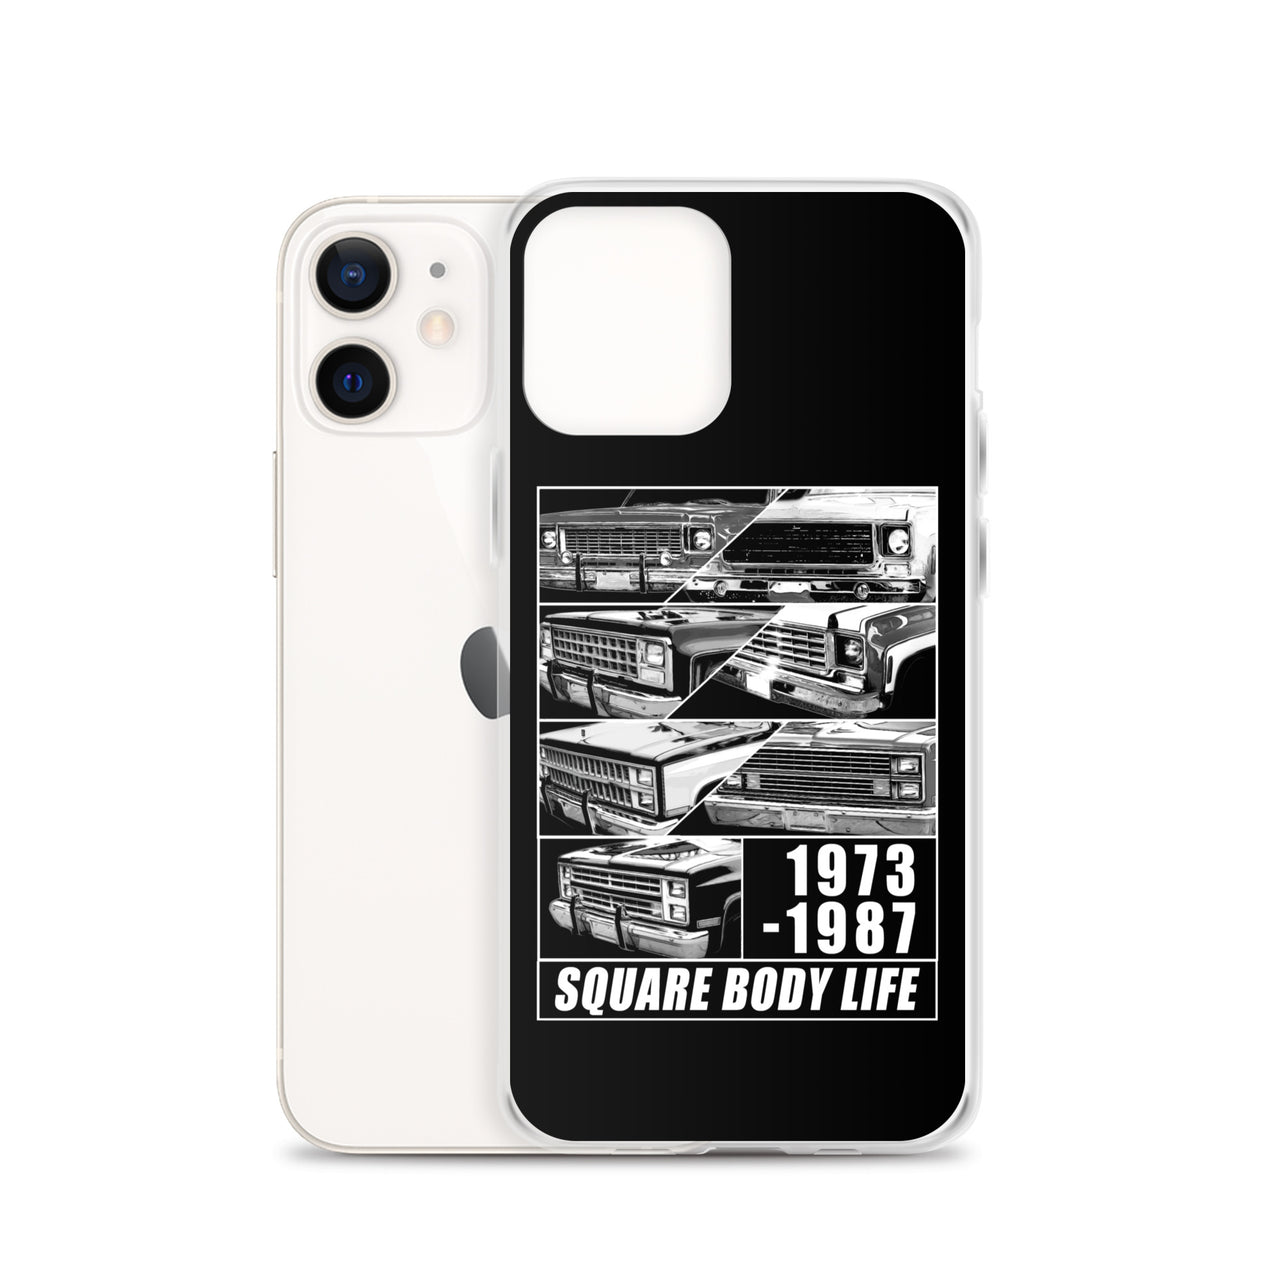 Square Body Truck Grilles Phone Case For iPhone 12